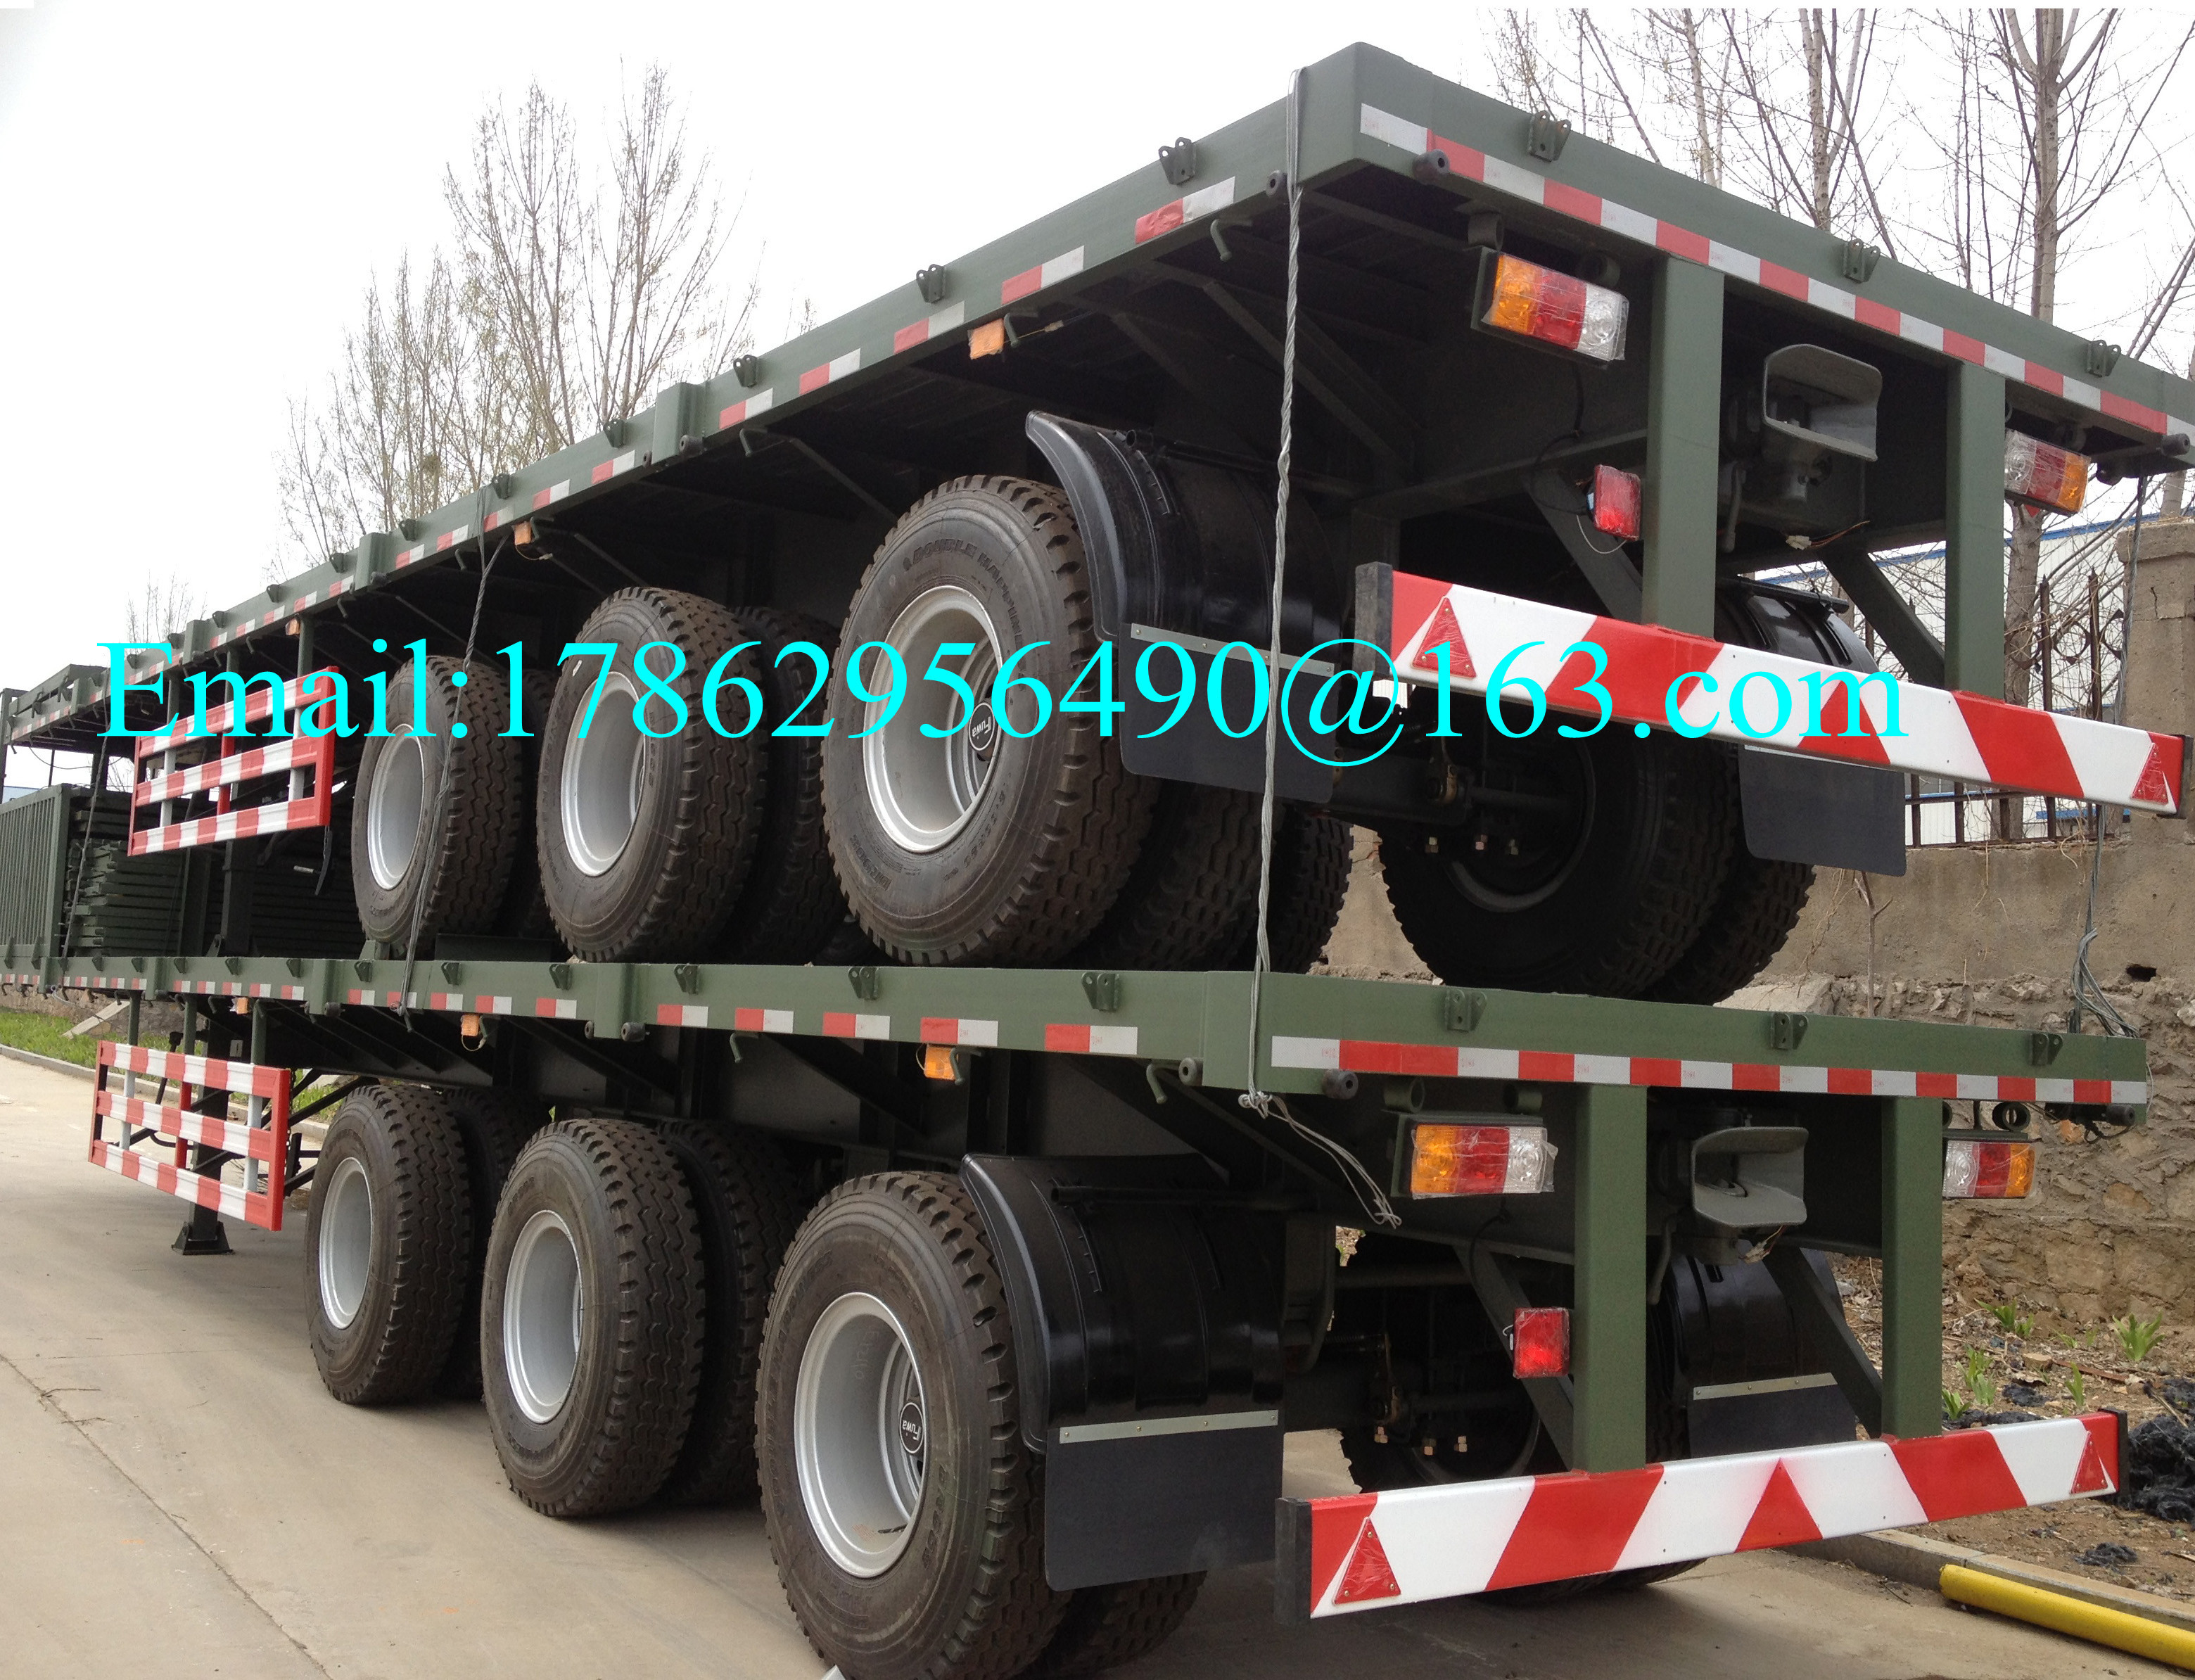 Three Alxes 40ft Heavy Duty Semi Trailers Flatbed Truck With 28 Tons Landing Gear